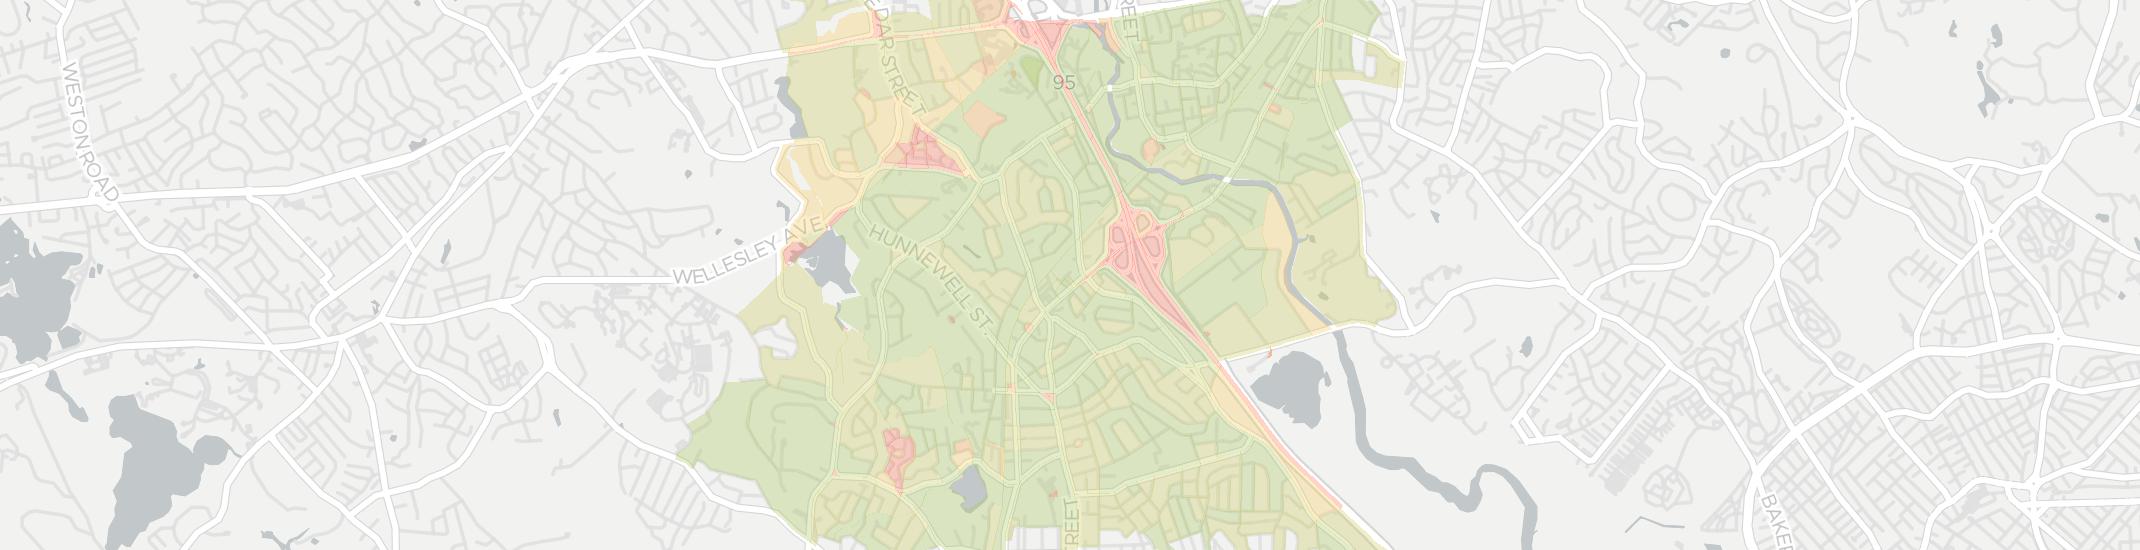 Needham Heights Internet Competition Map. Click for interactive map.